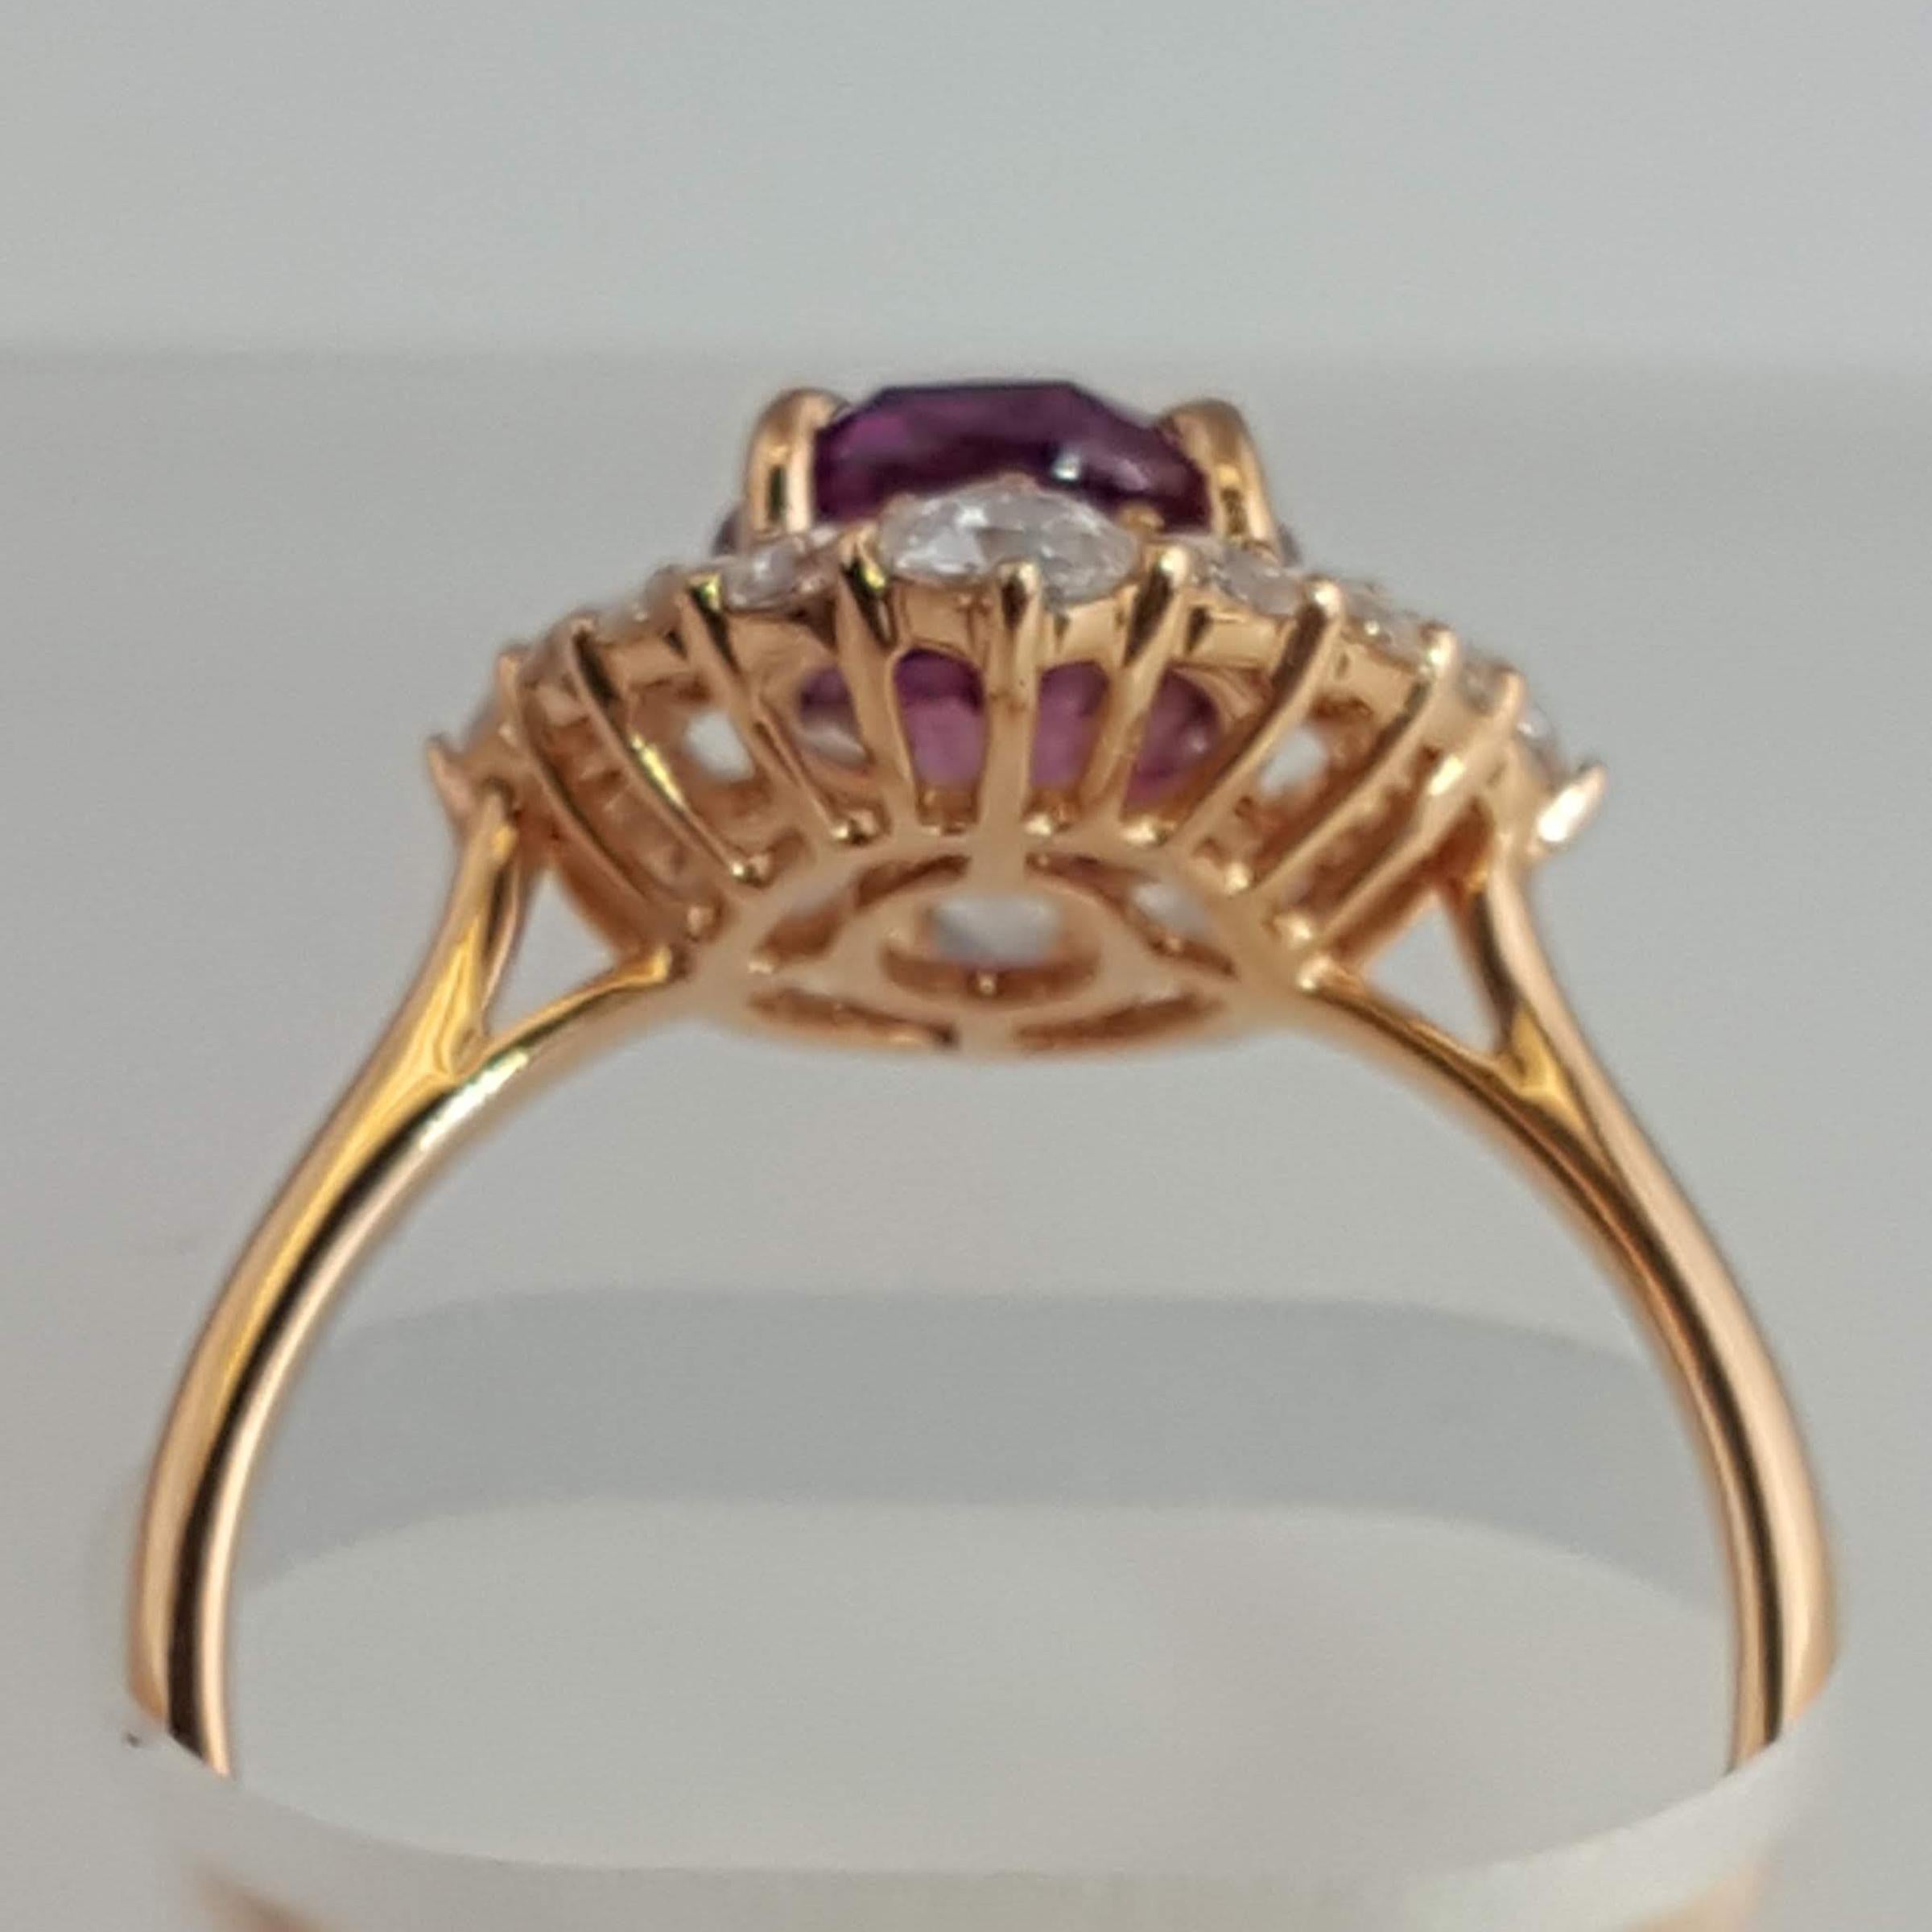 GIA Certified 2.48 Carat Oval Cut Purple-Pink Sapphire Ring in 18k Rose Gold 2